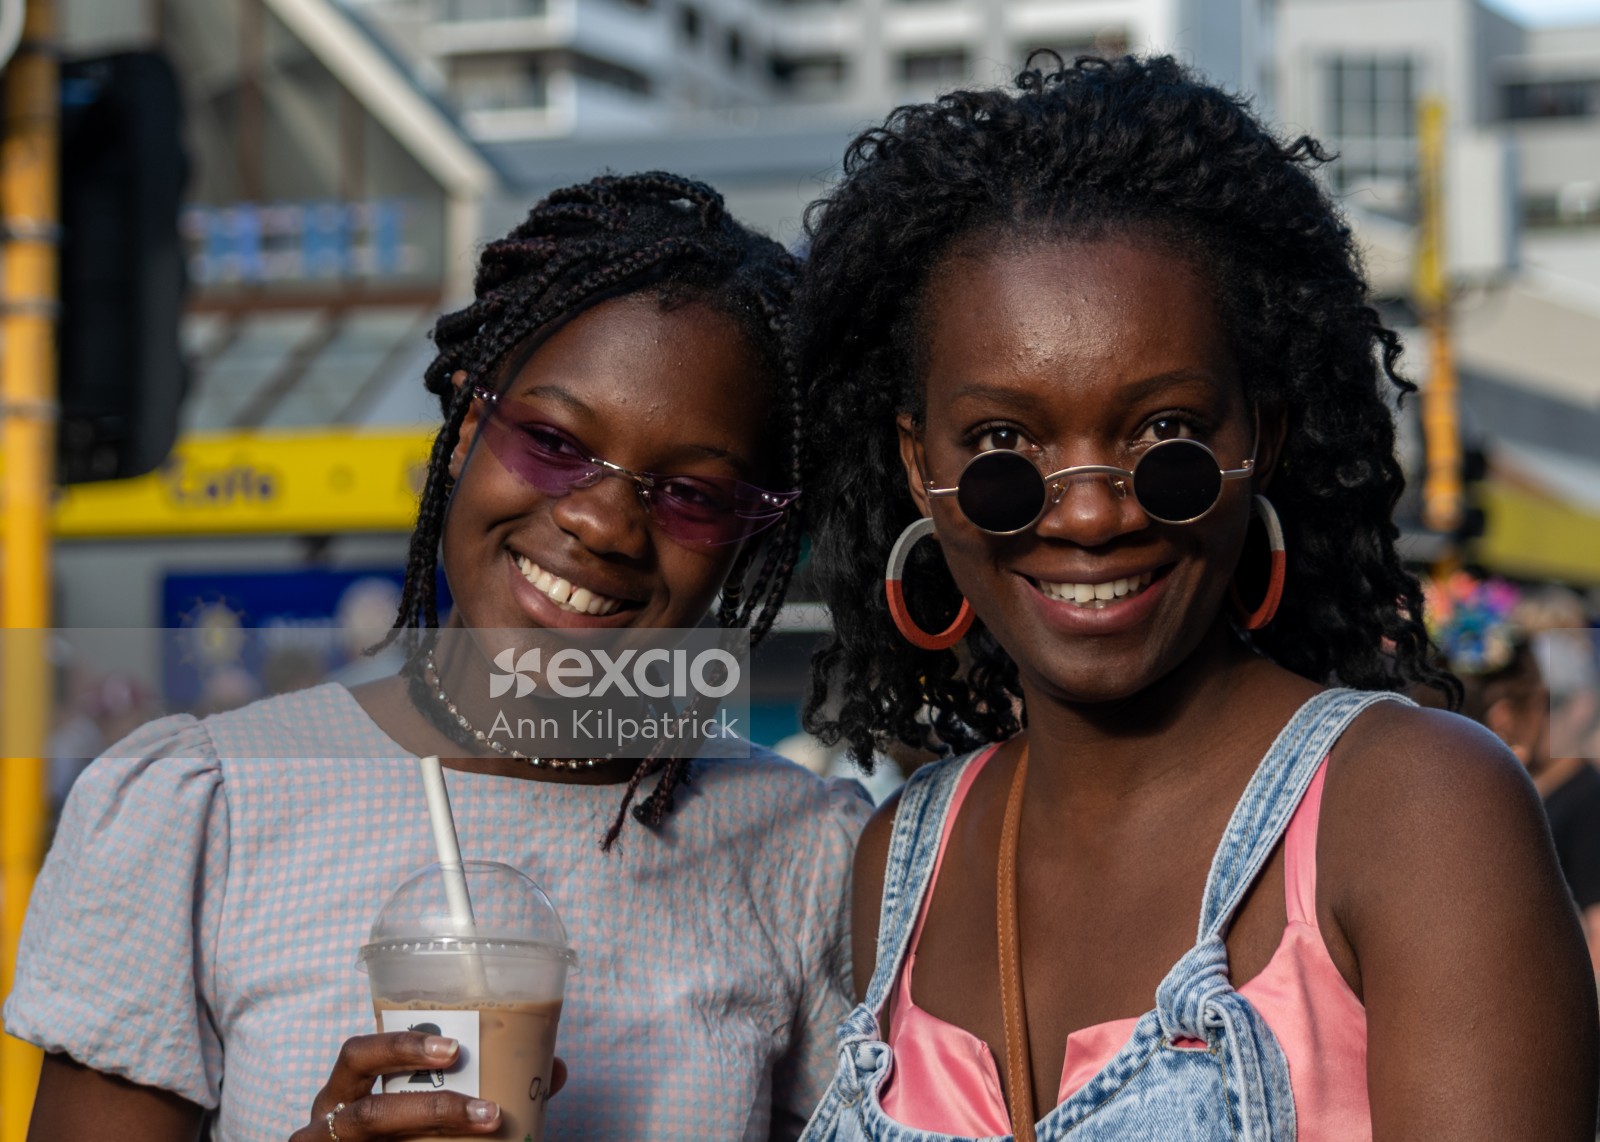 Two young dark skinned women 